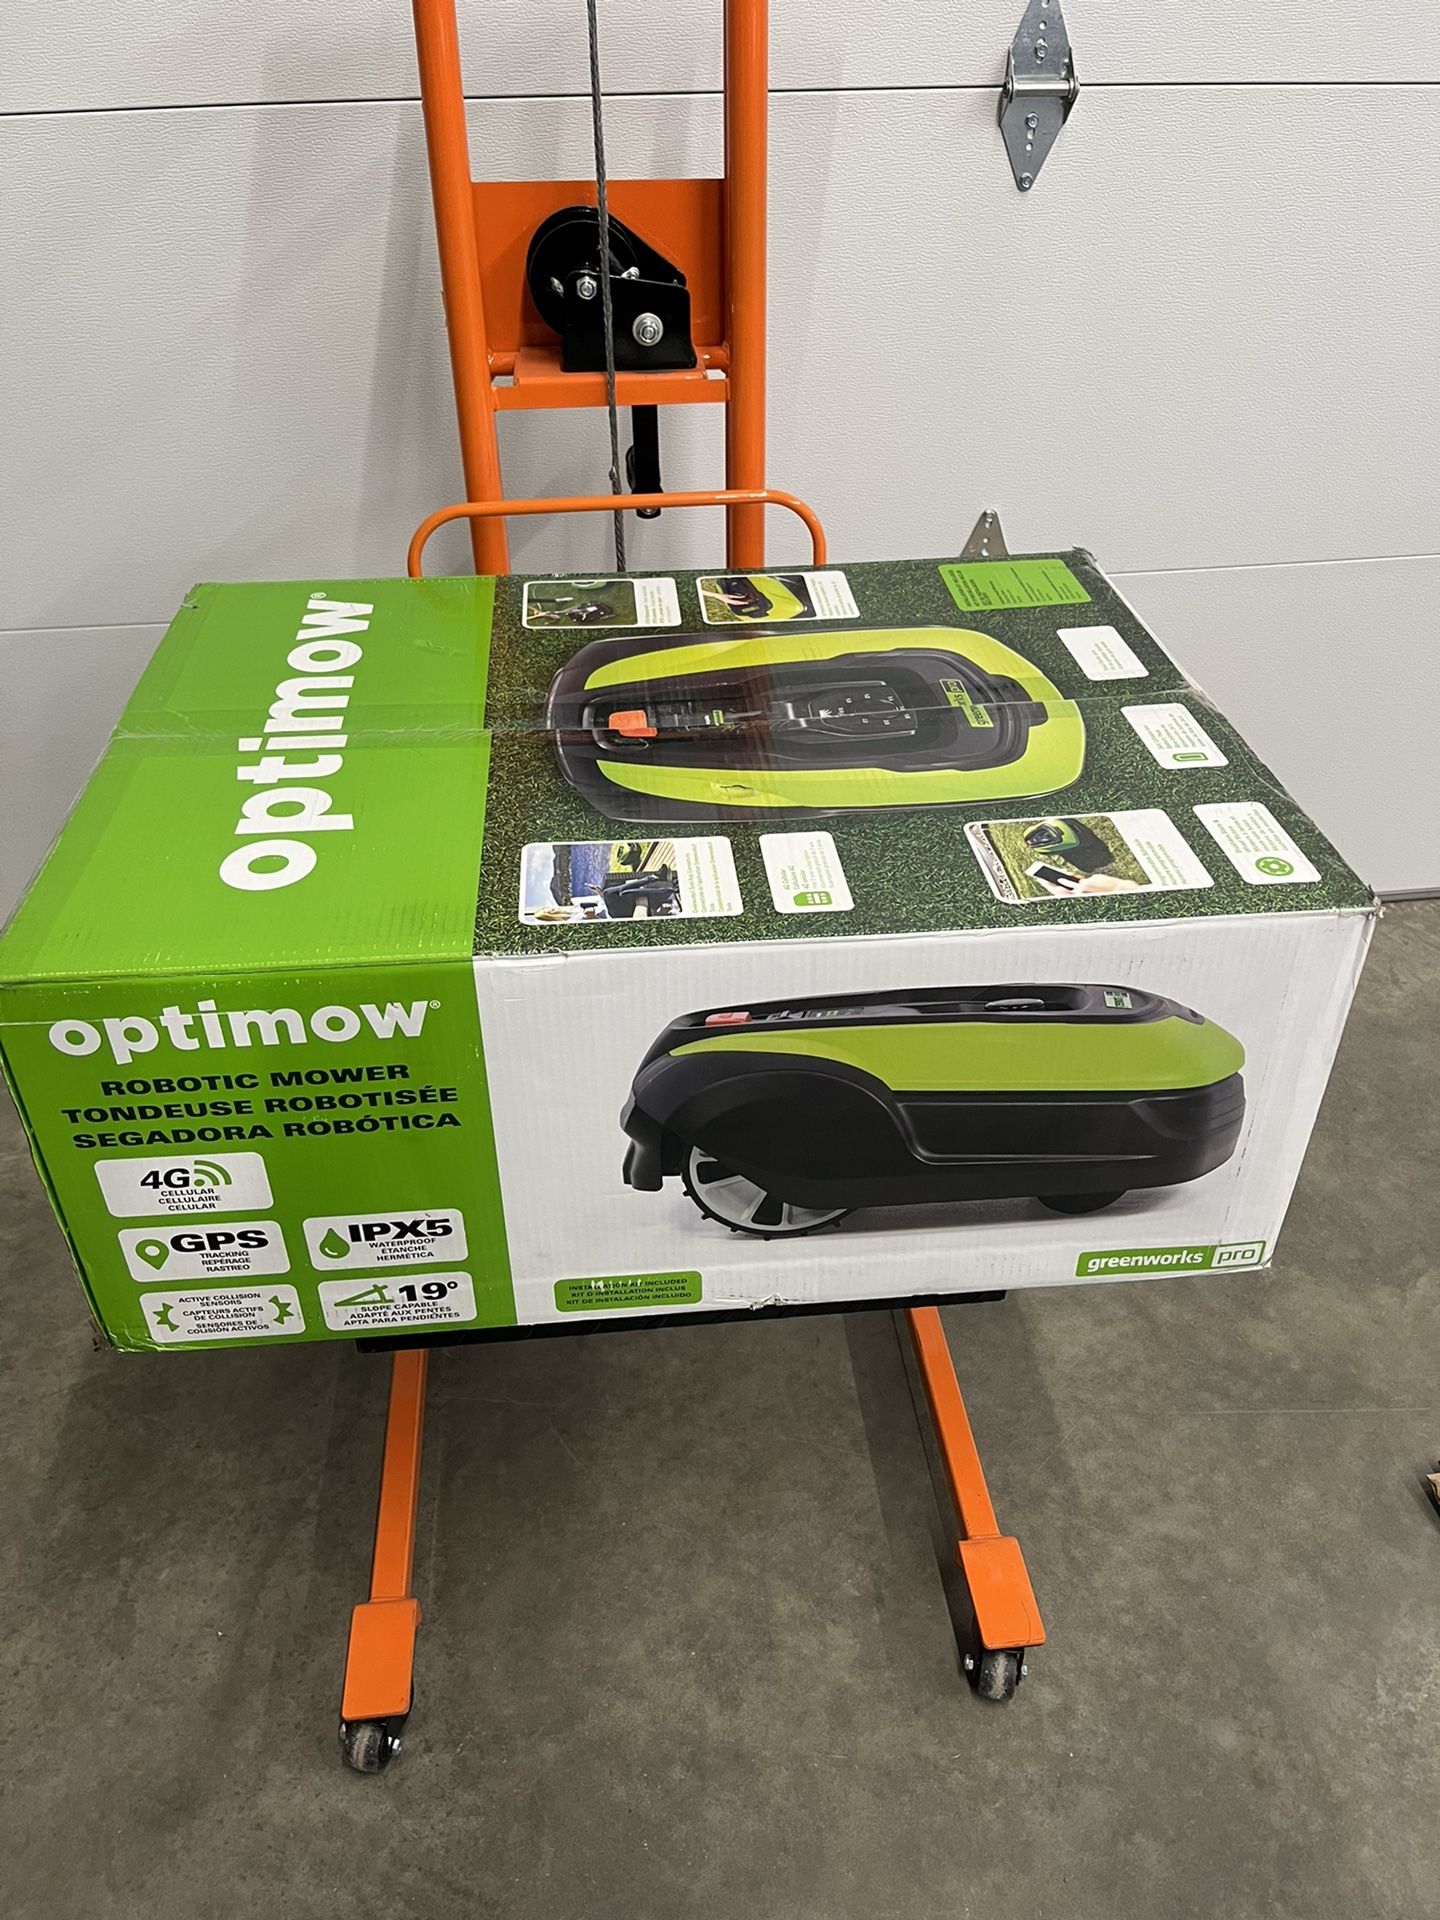 Greenworks Robotic Lawn Mower (1/4 Acre To 1/2 Acre) $1000 plus tax at Lowes website never open box still new 